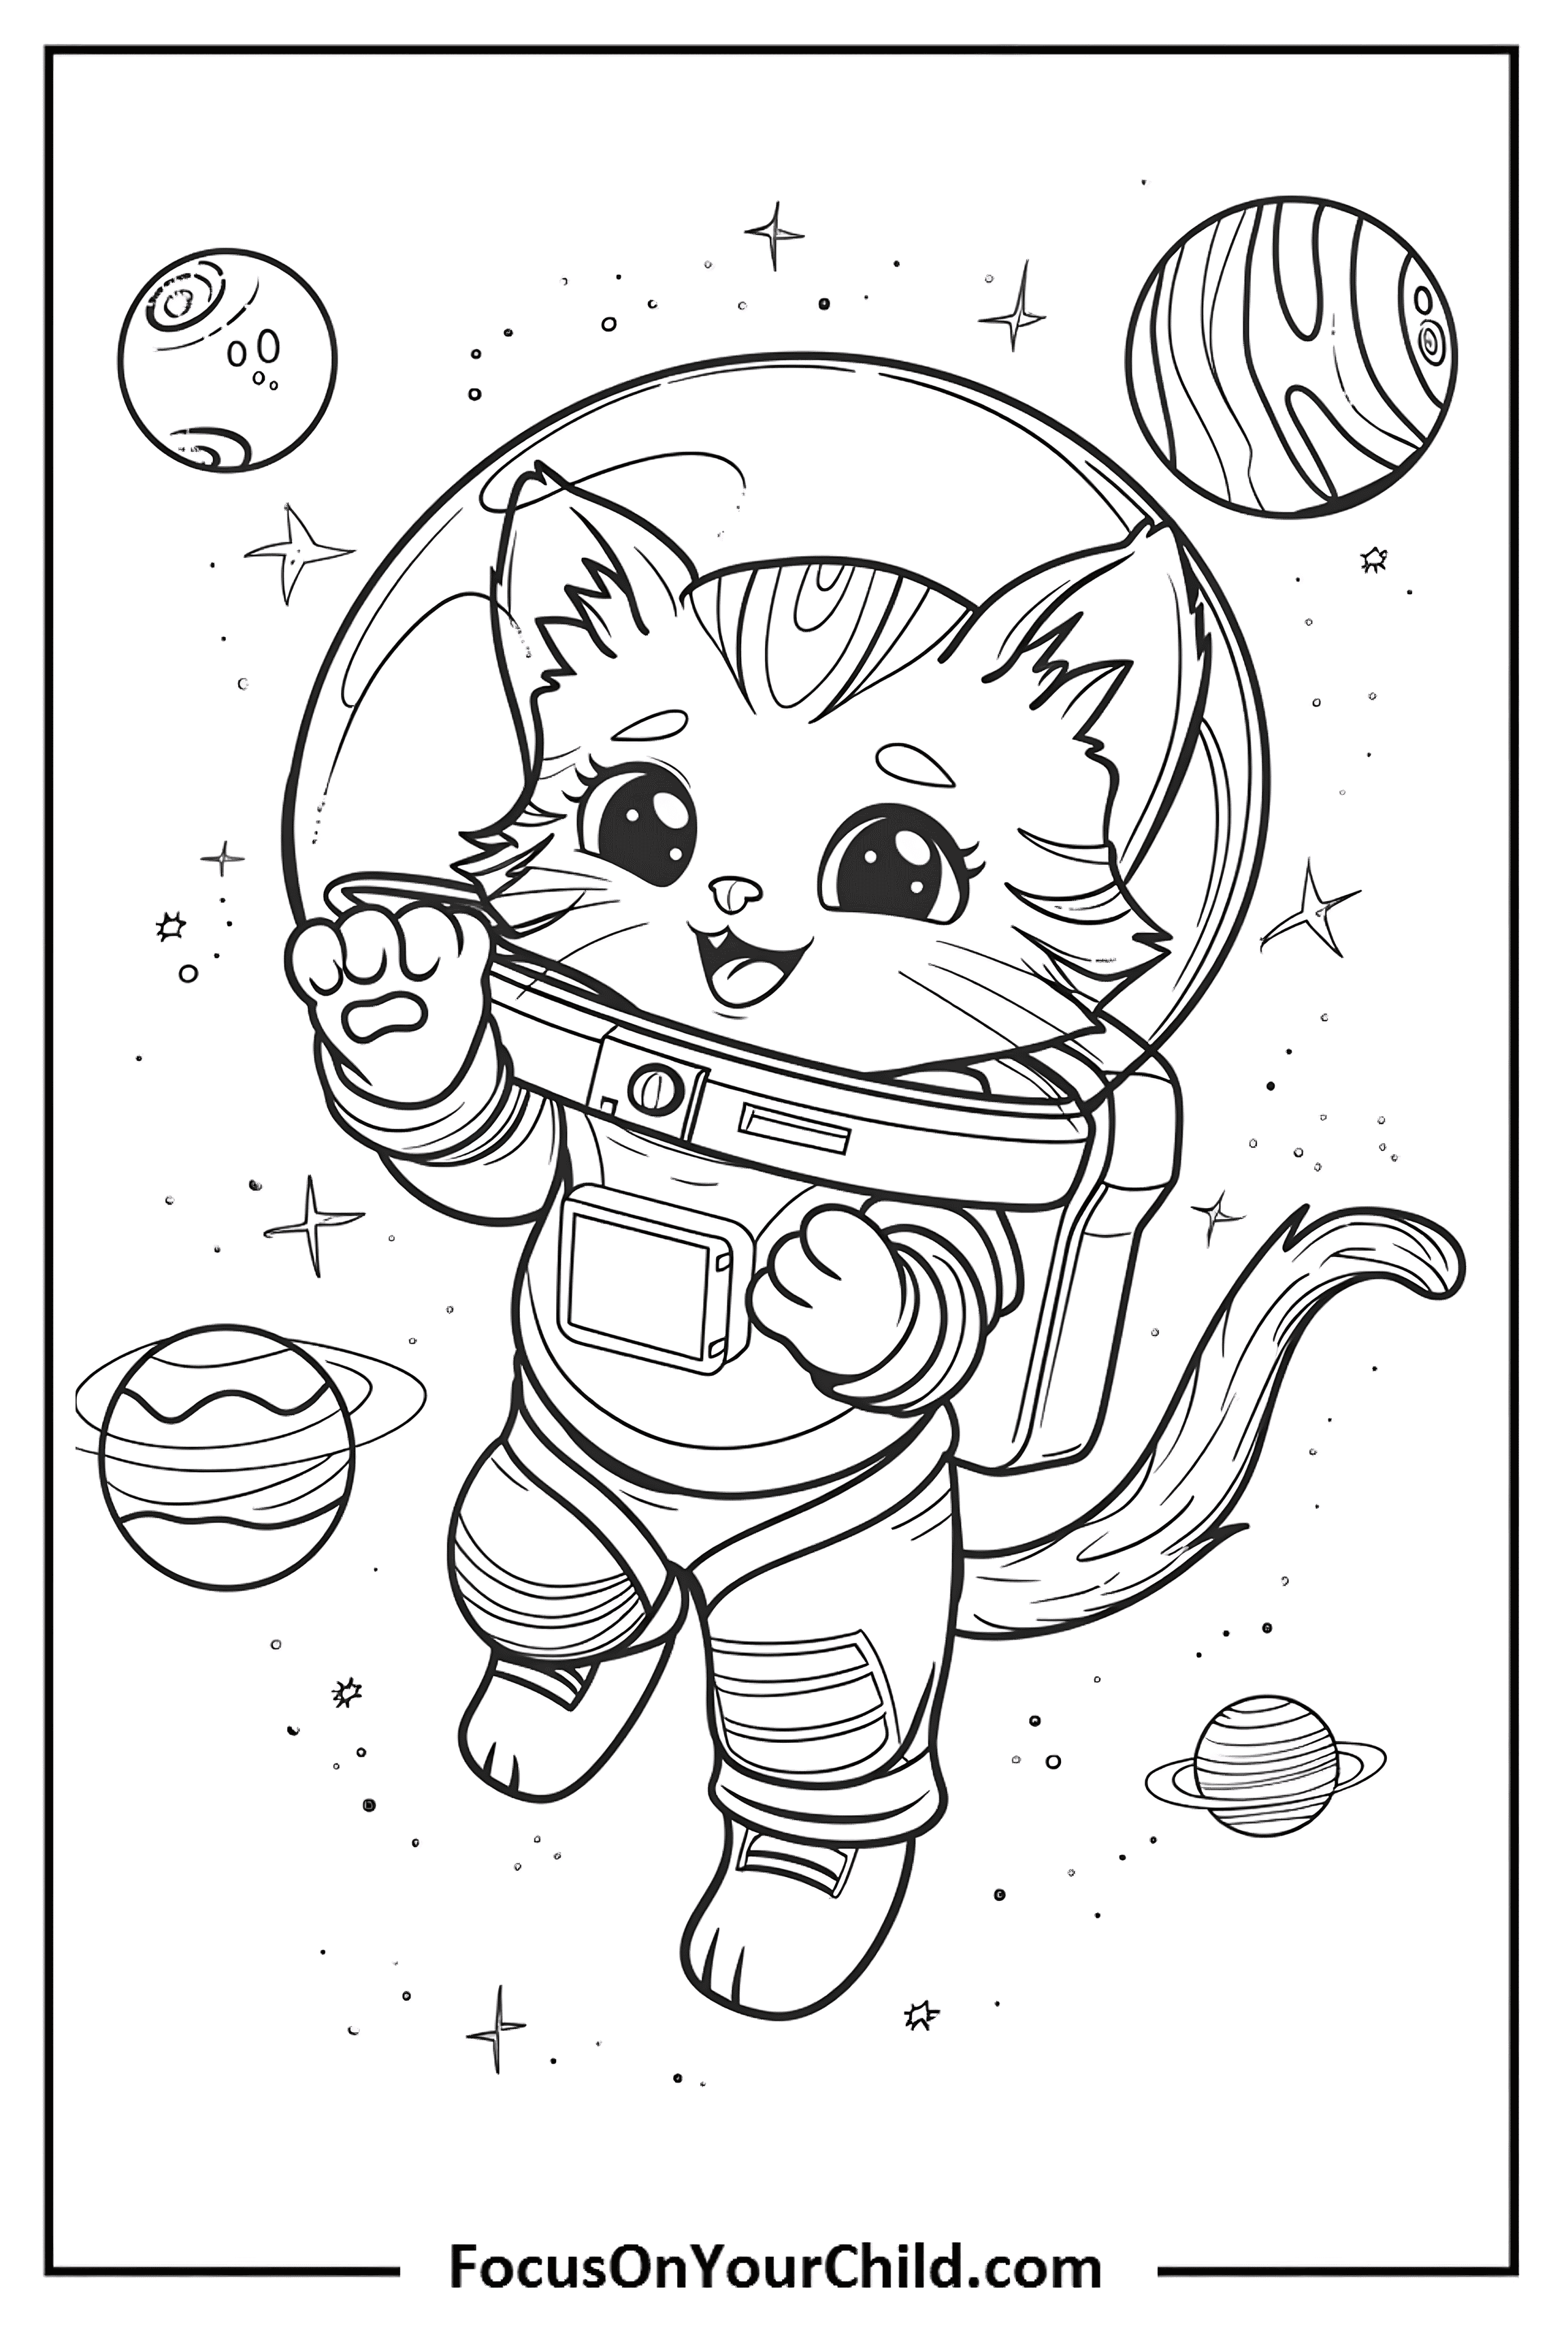 Adorable astronaut cat floating in space, surrounded by planets and stars.